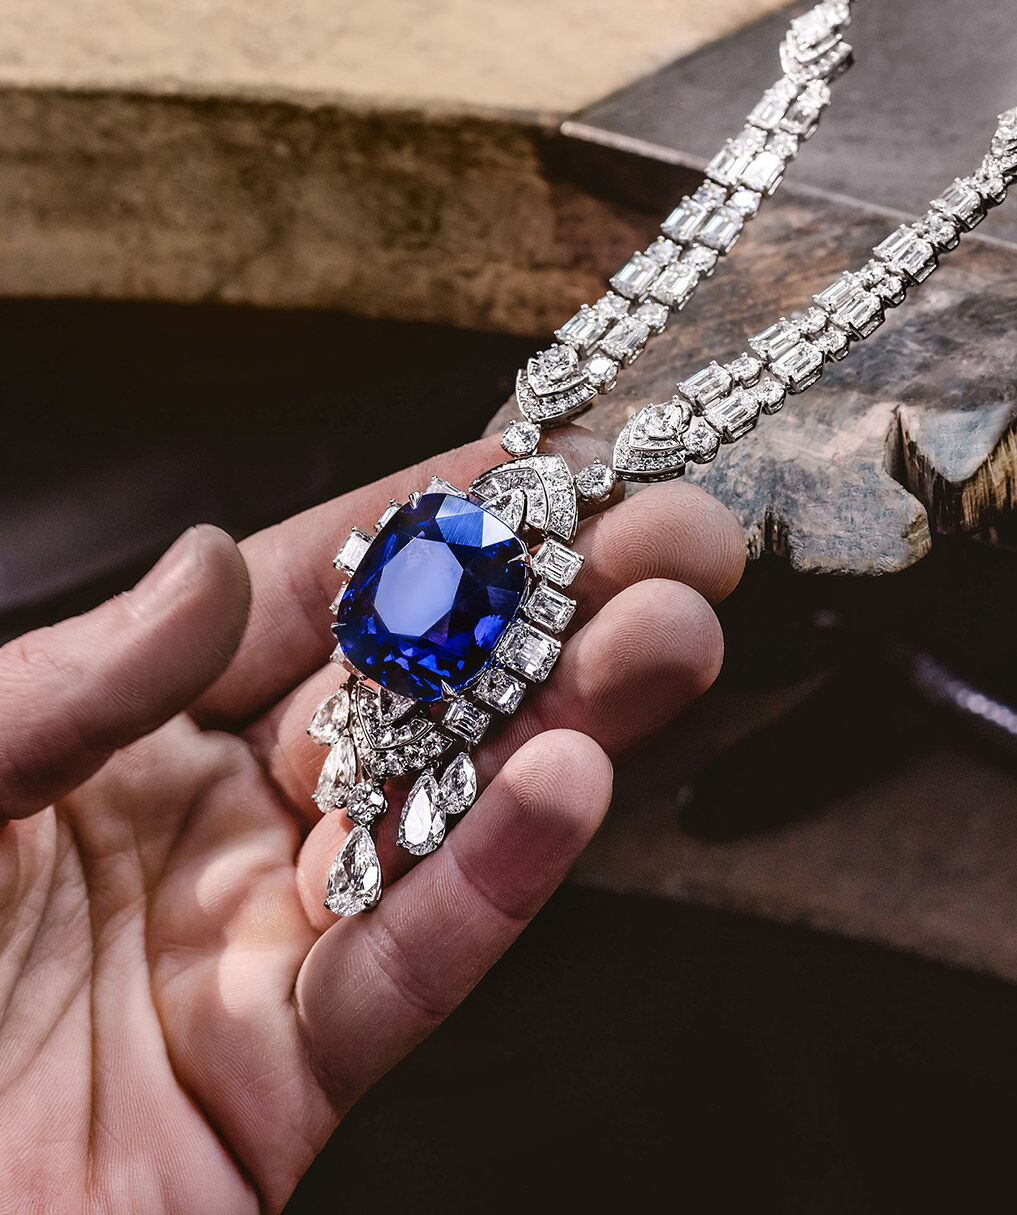 Craftsman holding Graff sapphire and white diamond high jewellery necklace in Graff workshop